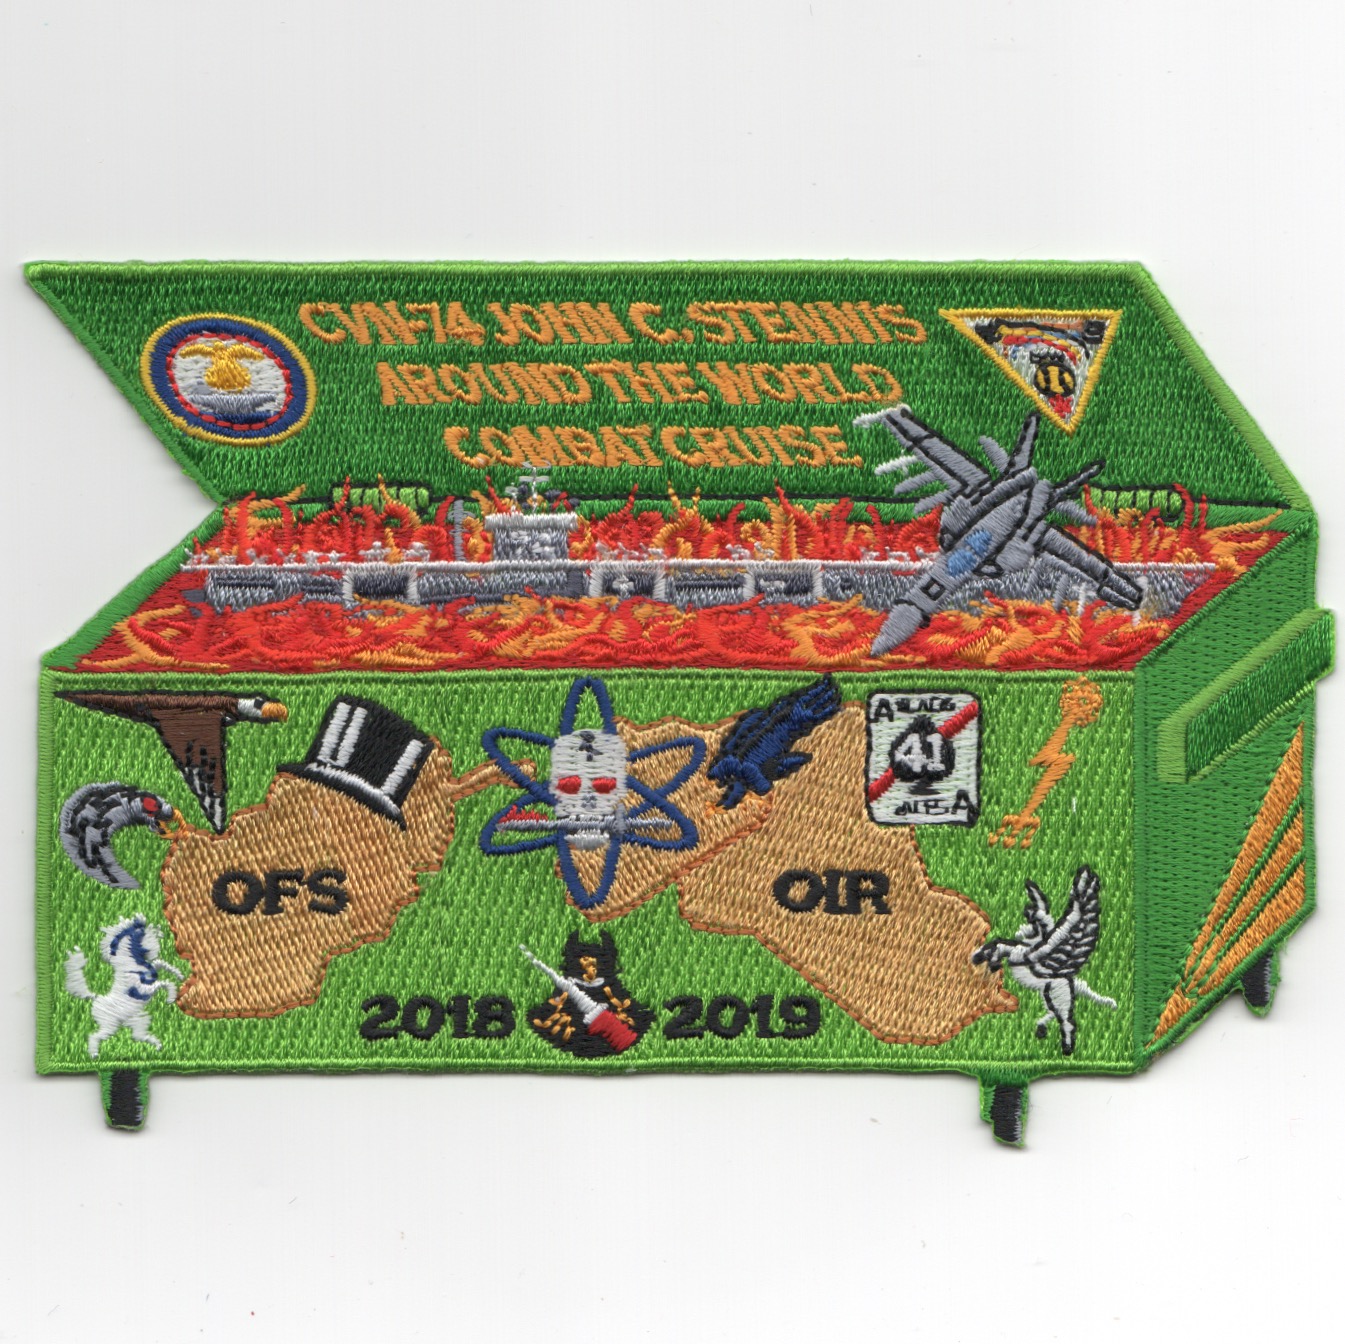 VFA-151 '2019 DUMPSTER' Cruise Patch